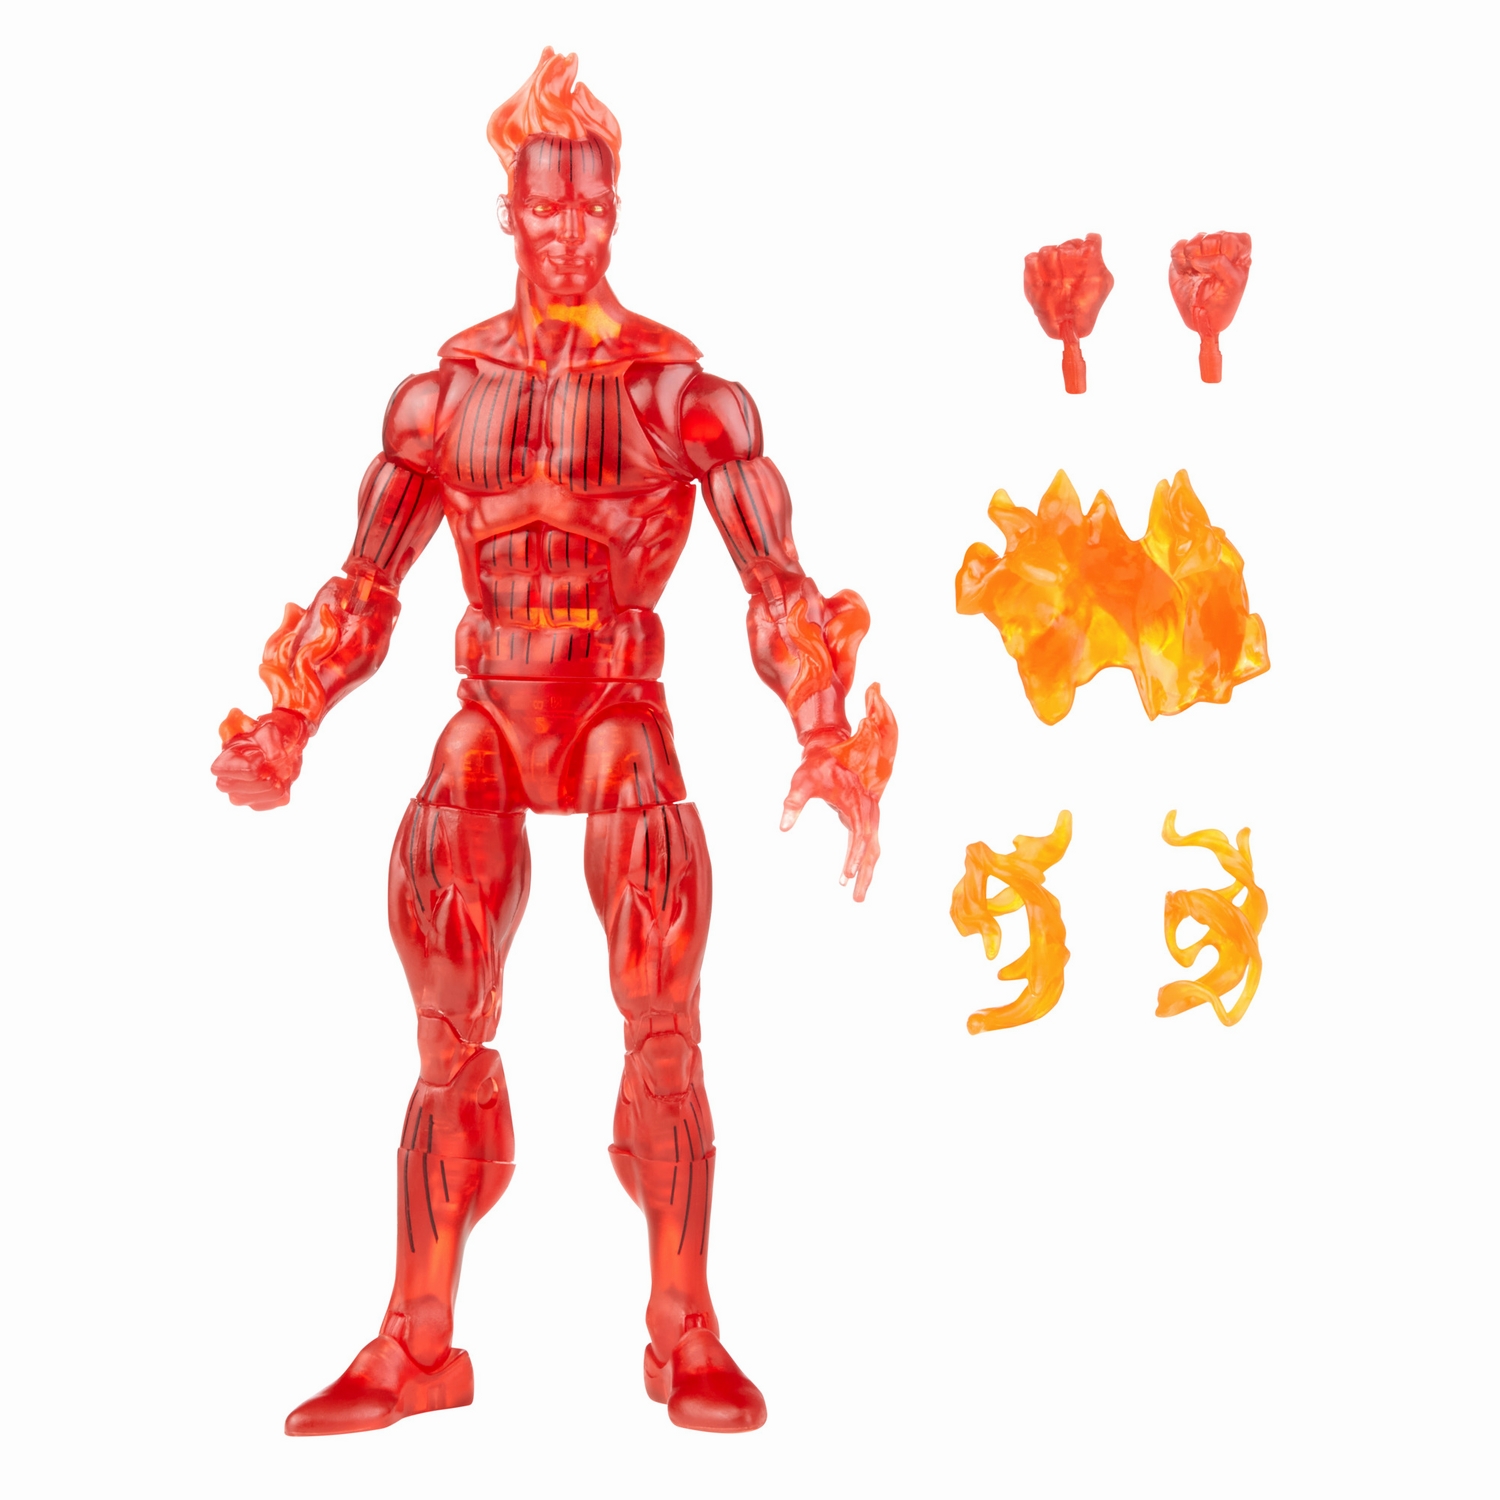 MARVEL LEGENDS SERIES 6-INCH RETRO FANTASTIC FOUR THE HUMAN TORCH Figure_oop 1.jpg